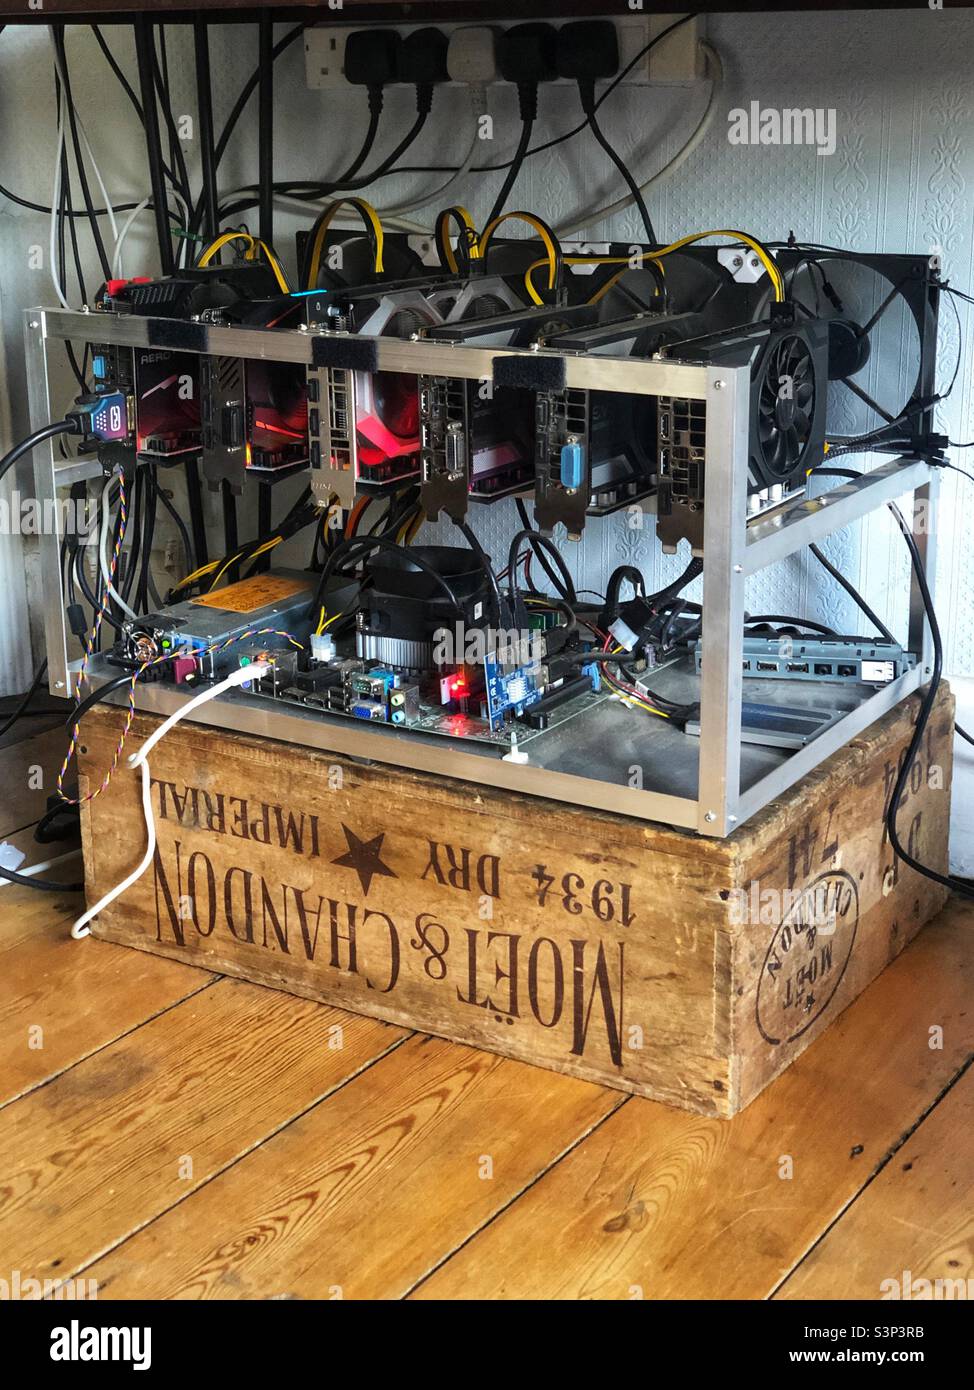 Bitcoin mining computer, an home built open frame pc mining crypto currency. Stock Photo